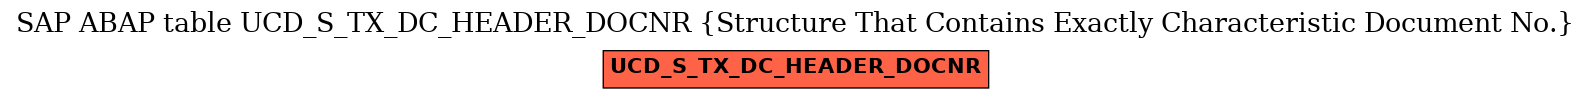 E-R Diagram for table UCD_S_TX_DC_HEADER_DOCNR (Structure That Contains Exactly Characteristic Document No.)